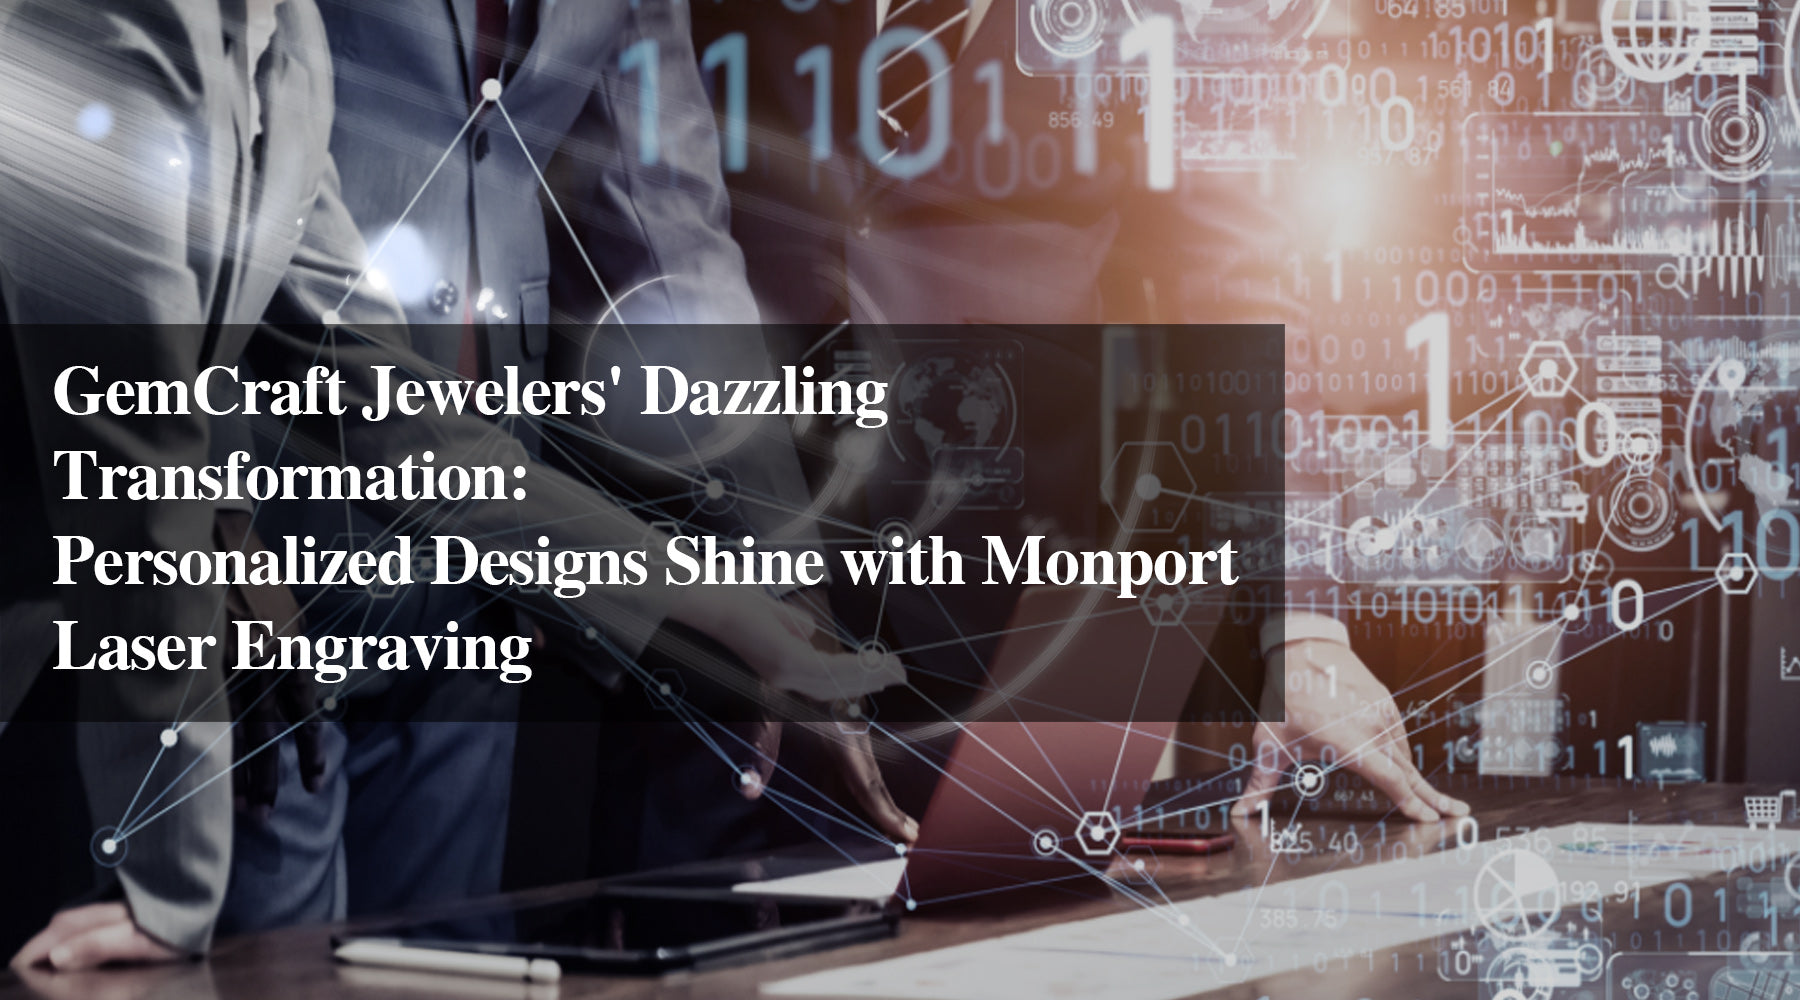 GemCraft Jewelers' Dazzling Transformation: Personalized Designs Shine with Monport Laser Engraving